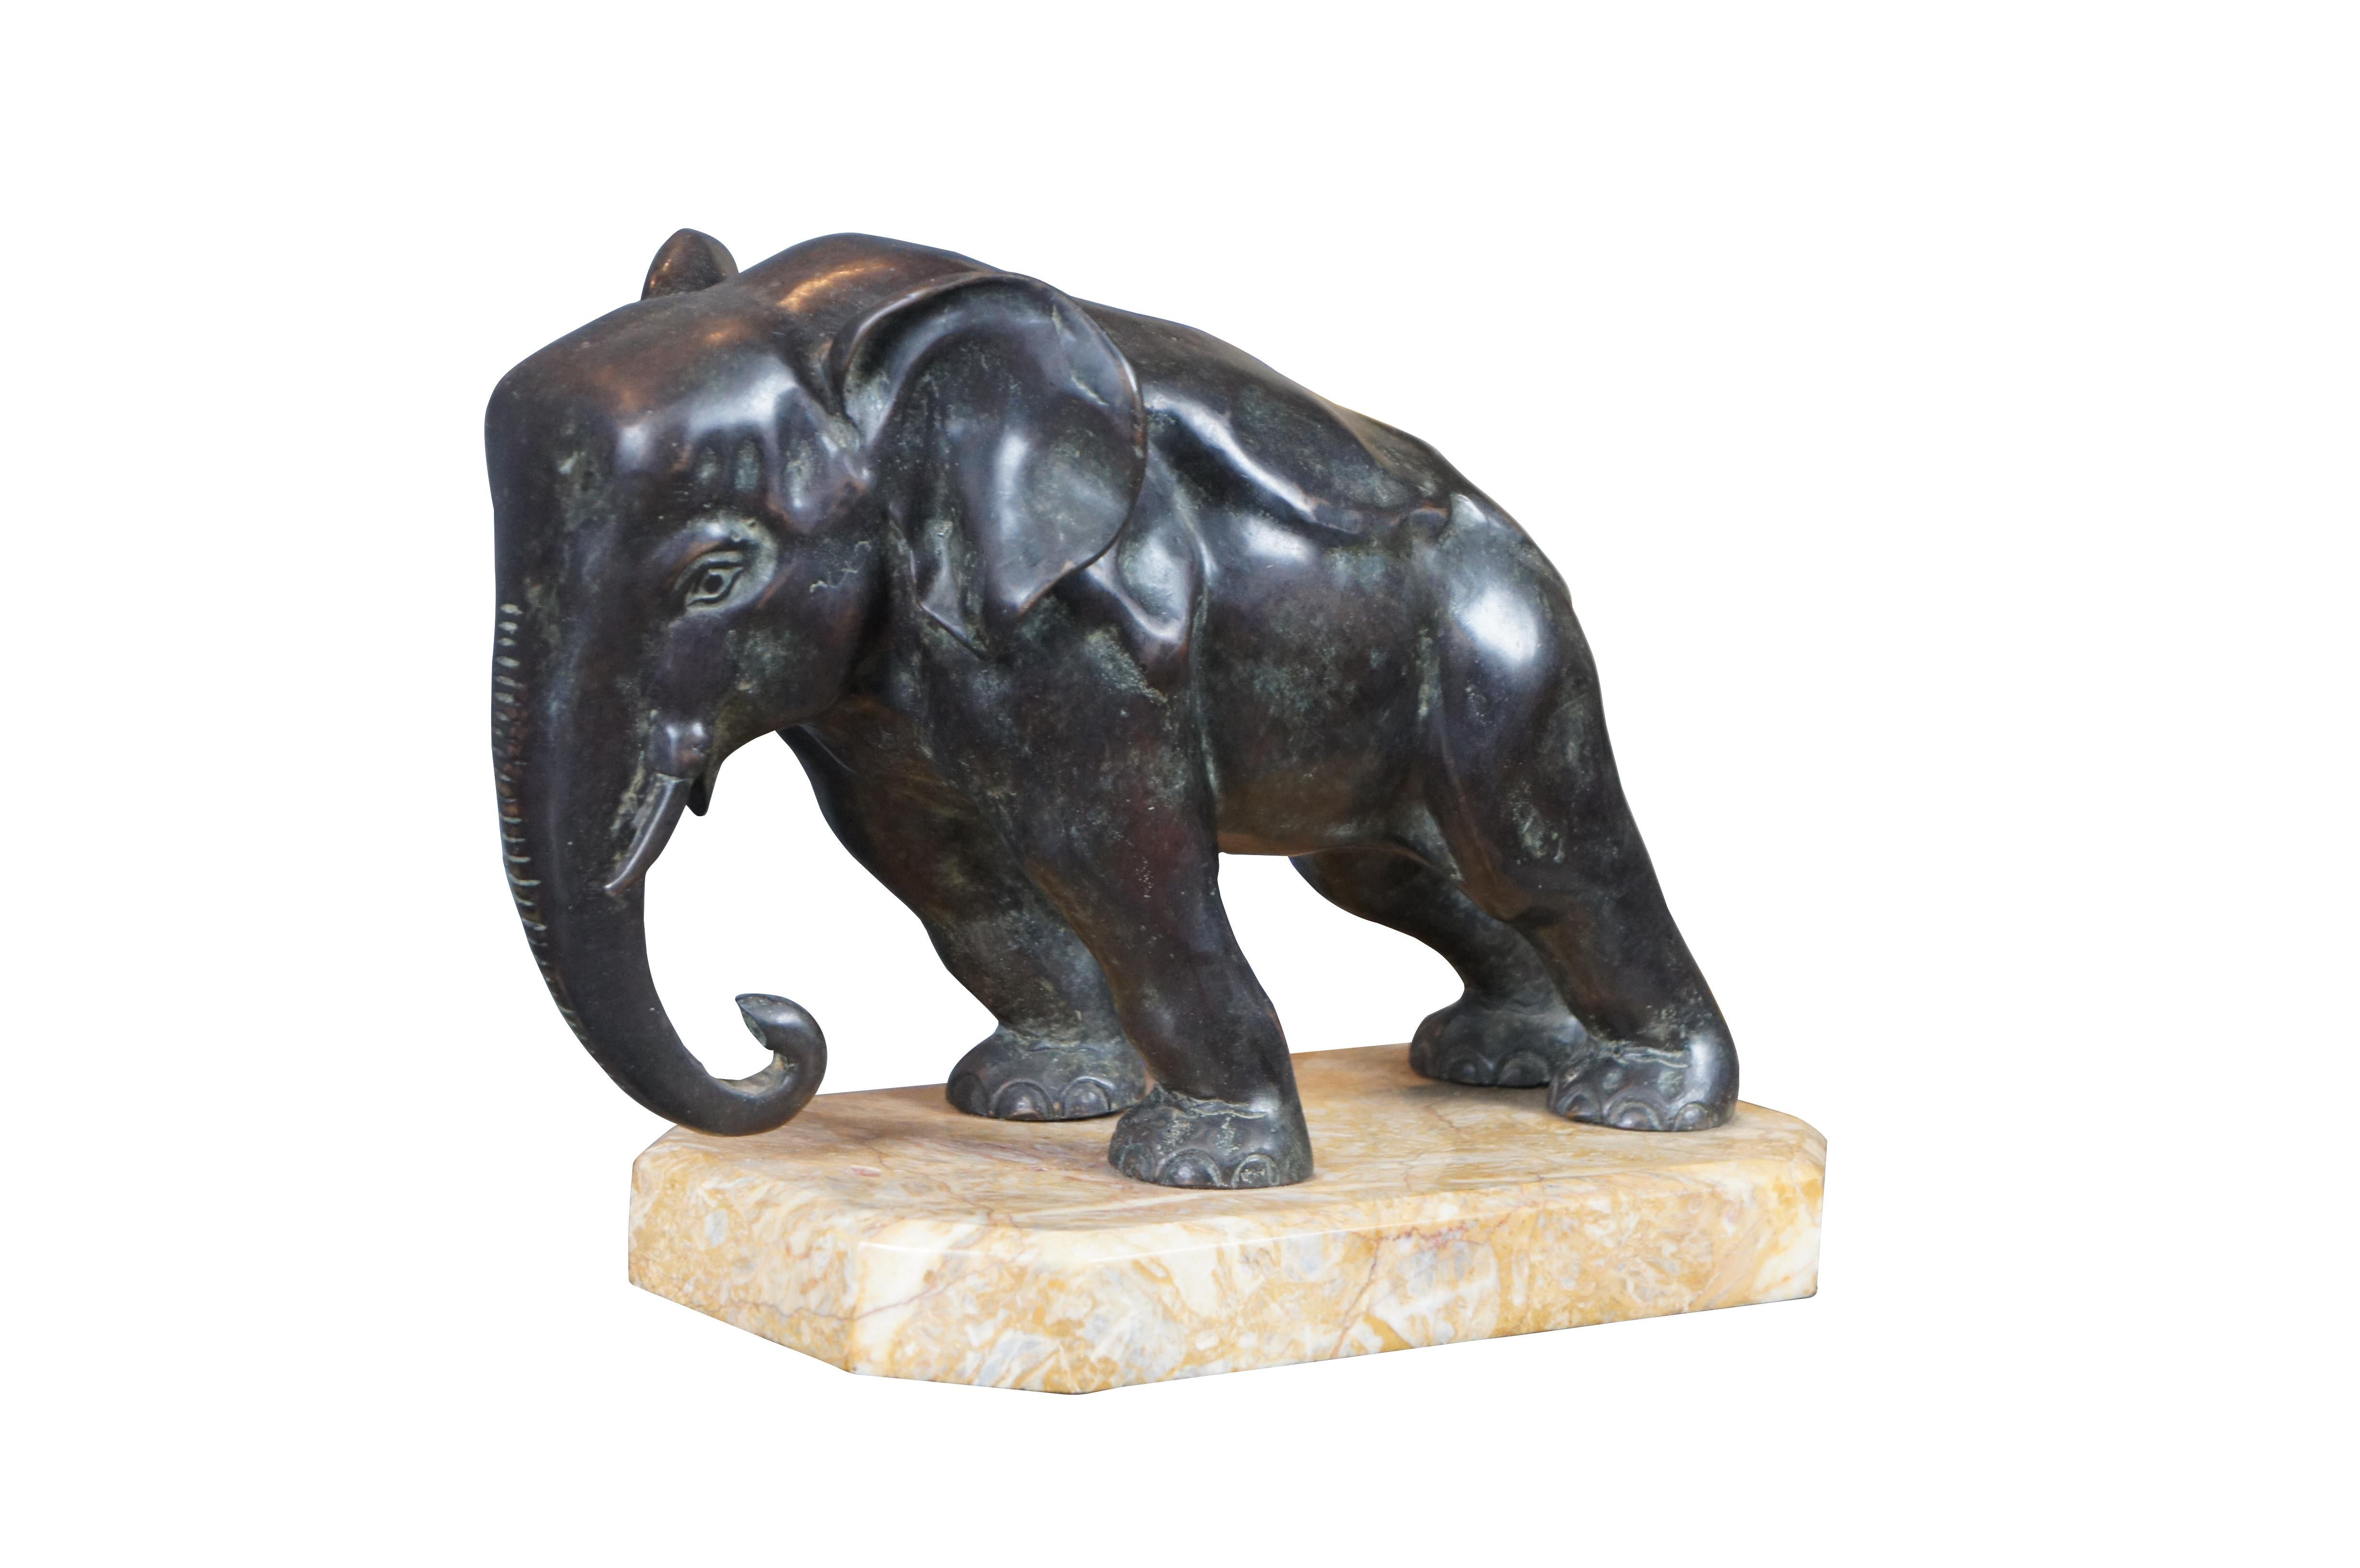 Art Deco bronze bookend, circa 1920s. An uncommon large size, depicting an elephant leaning forward bracing to hold up a row of books.

Pushing with the flattened front part of its head, trunk are partially curled beneath open mouth with short